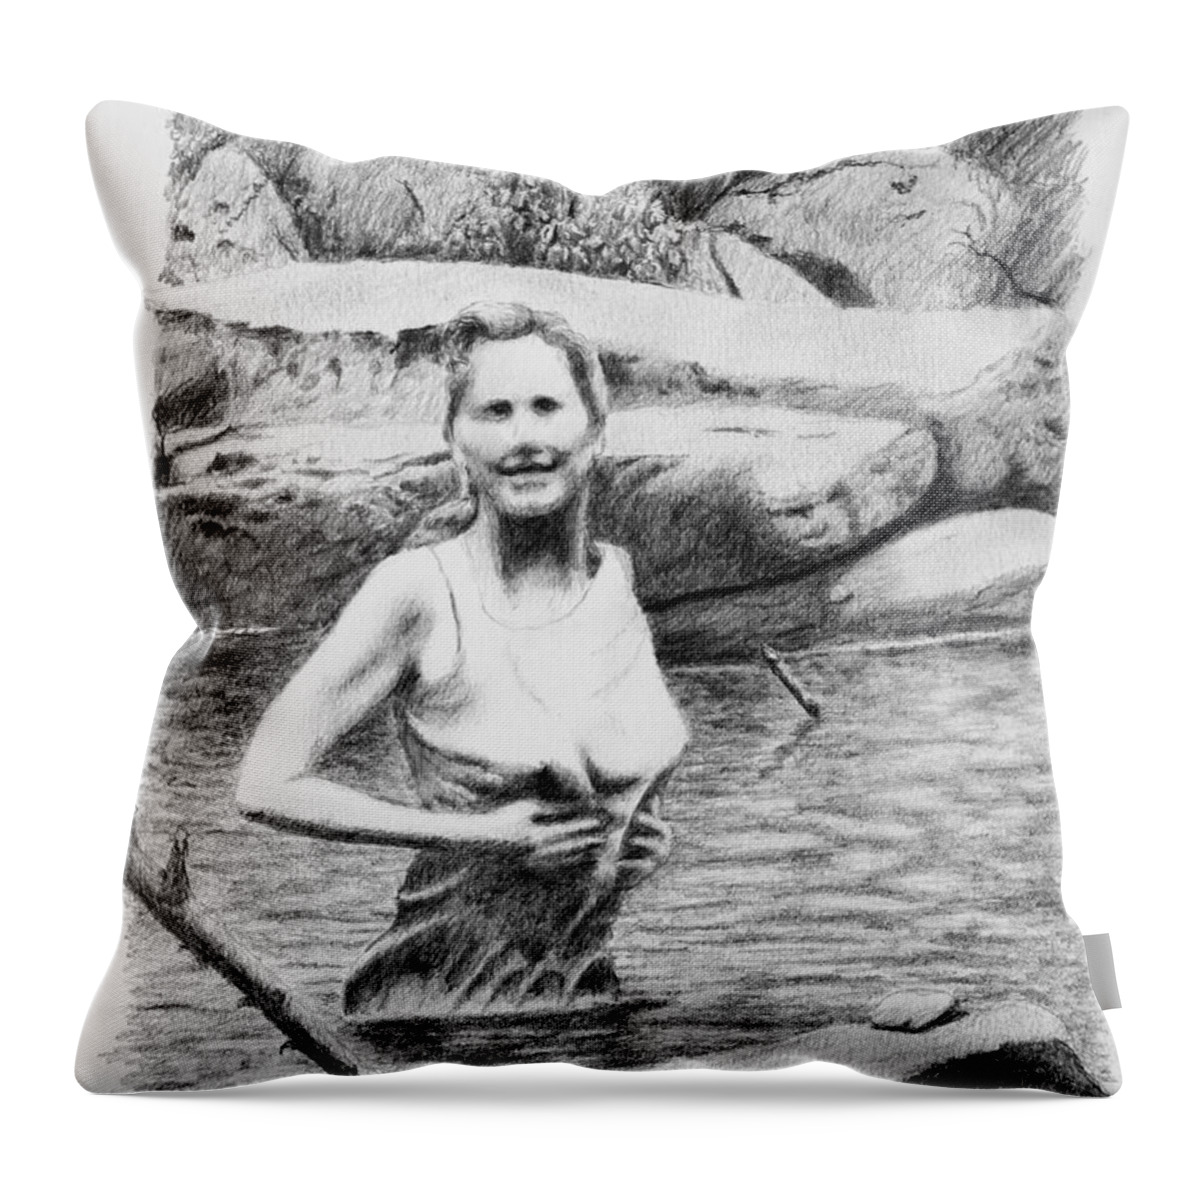 Girl Throw Pillow featuring the drawing Girl In Savage Creek by Daniel Reed